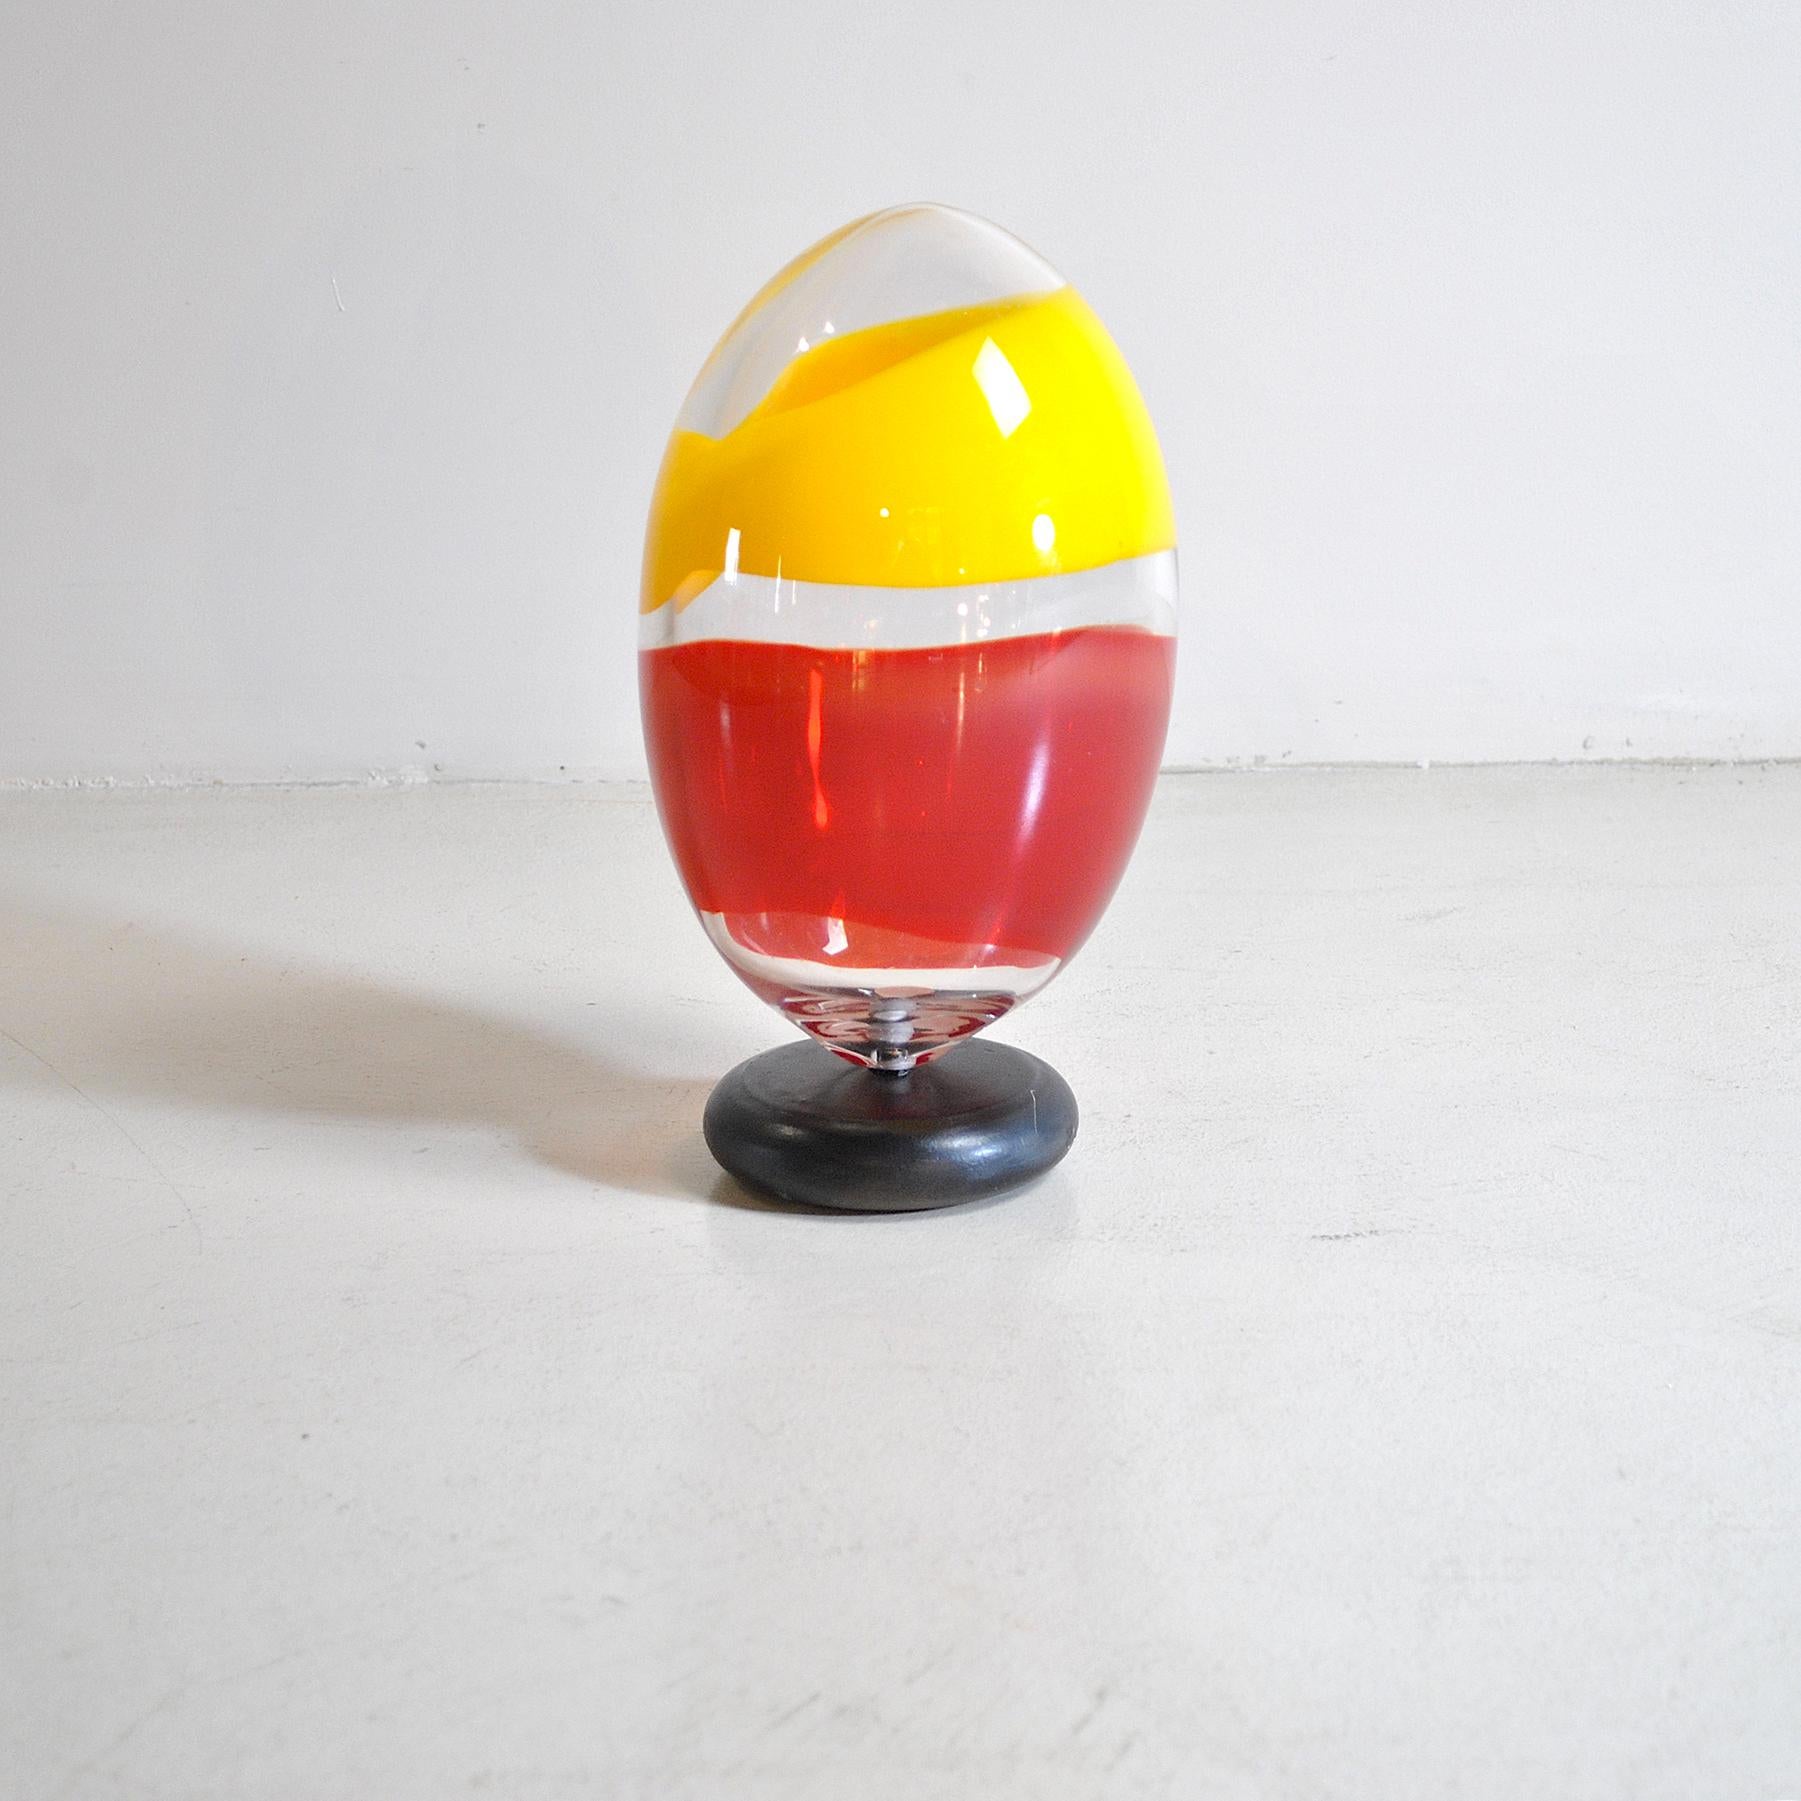 1960s solid glass egg-shaped paperweight.